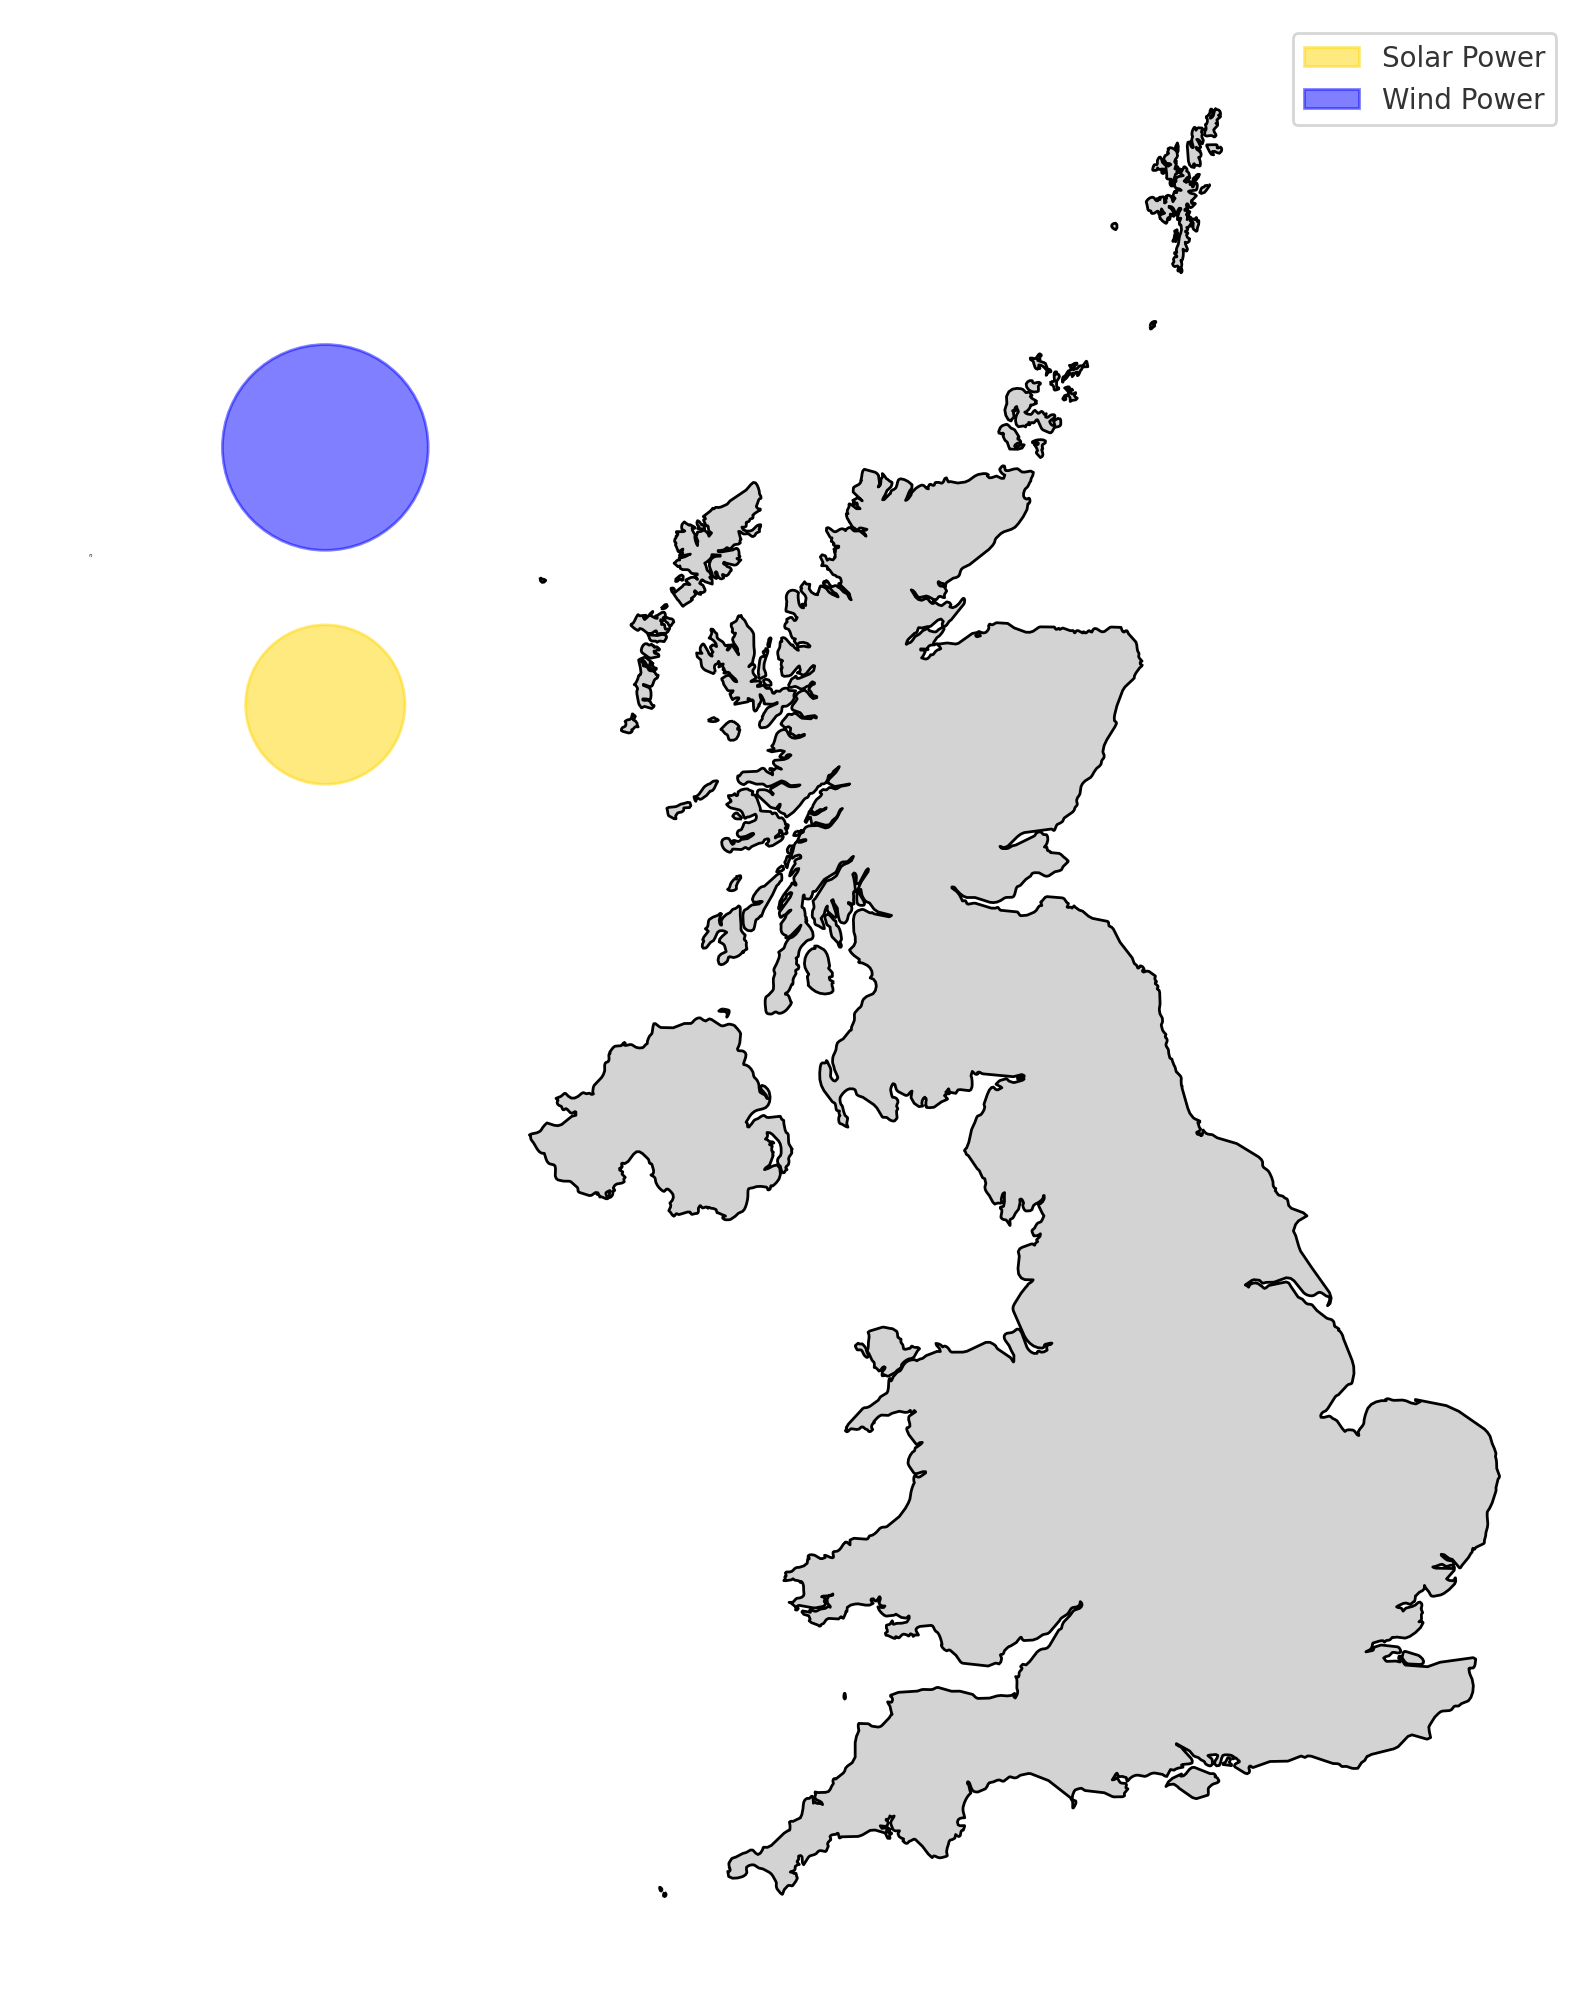 A map of the UK with the space hydrogen aviation fuel would require superimposed on top.